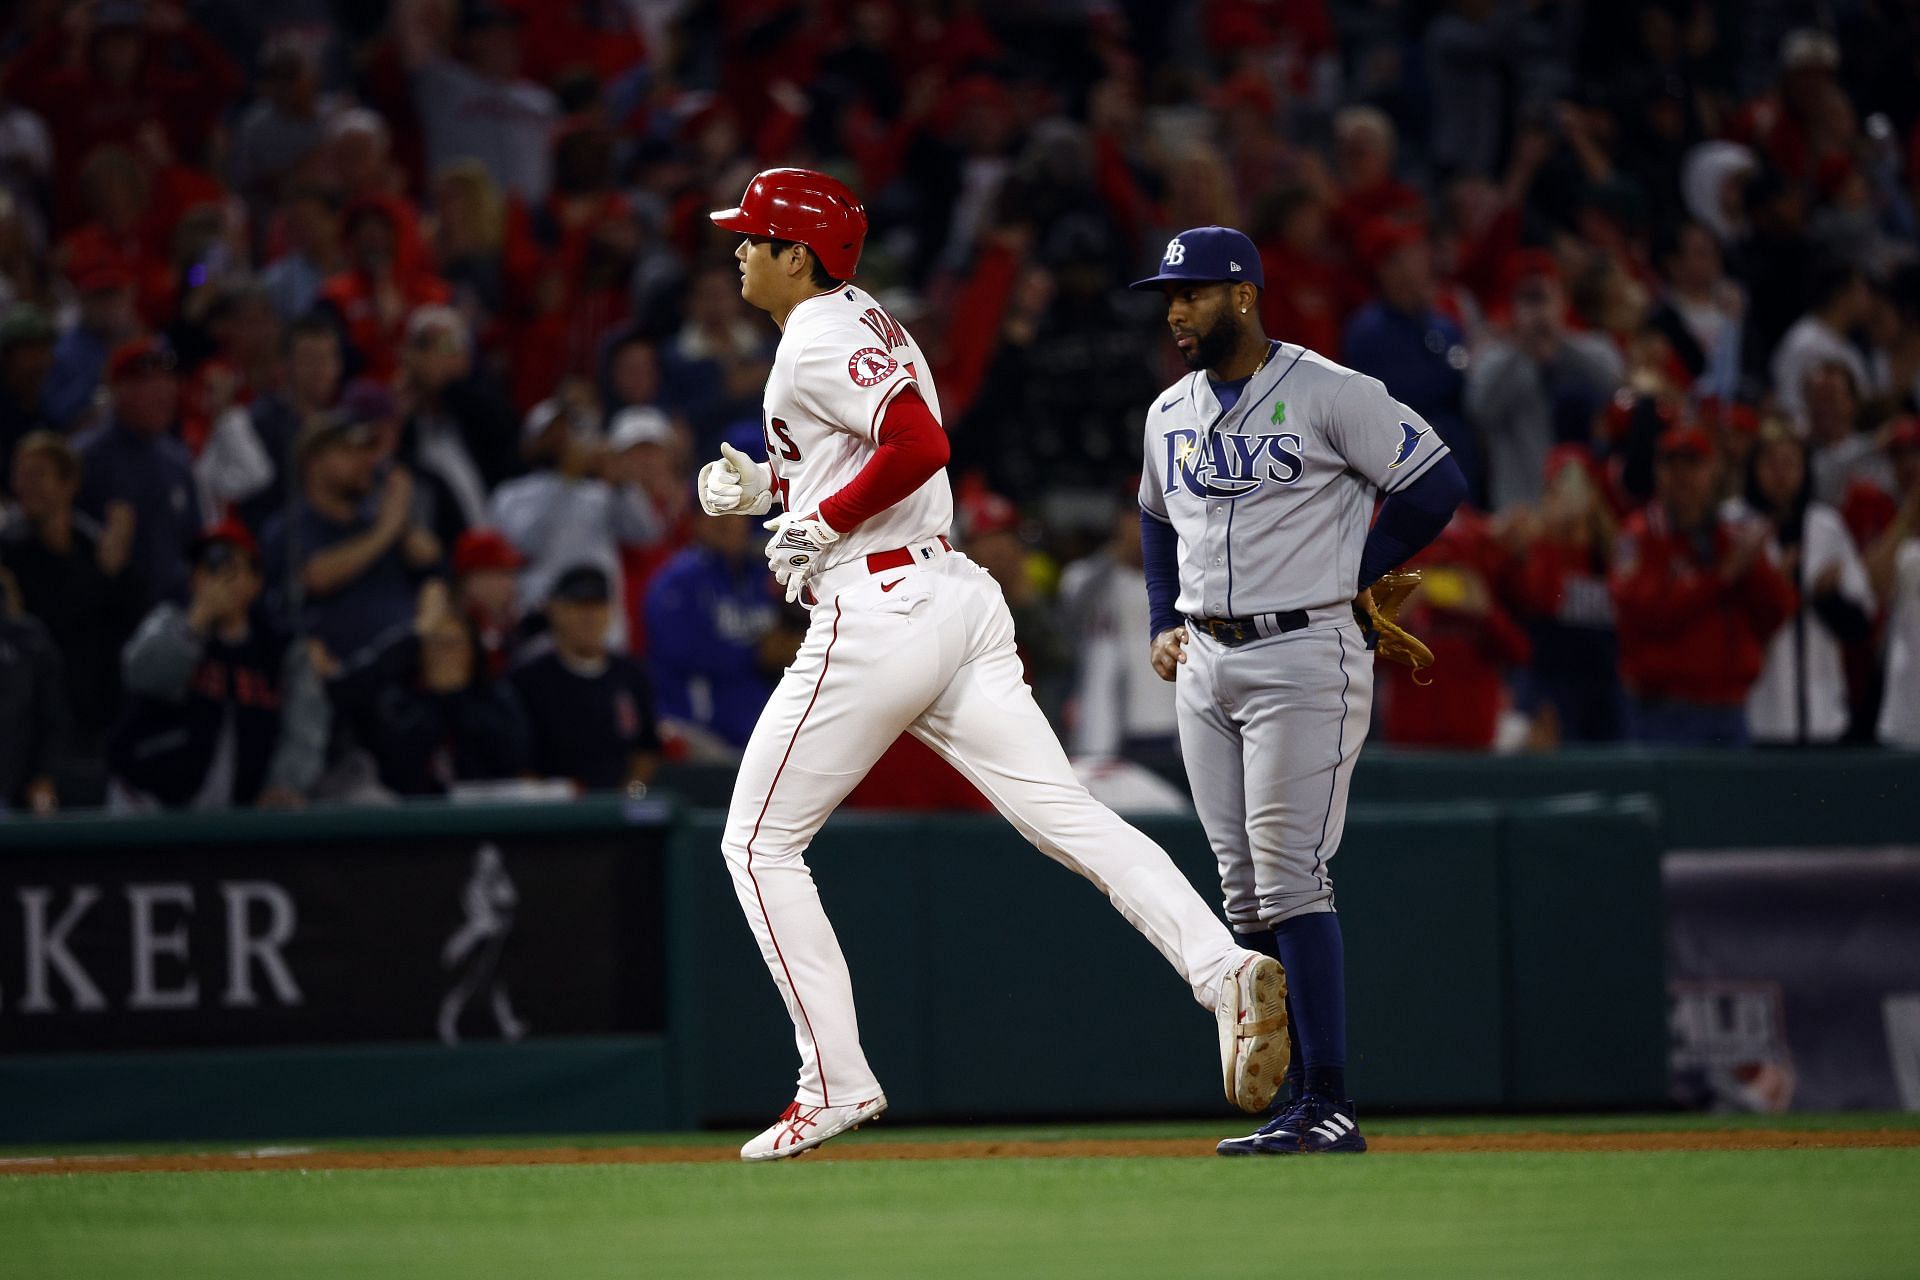 Angels phenomenon Ohtani hit his first career grand slam against the Tampa Bay Rays. He is seen here rounding the bases after the milestone.